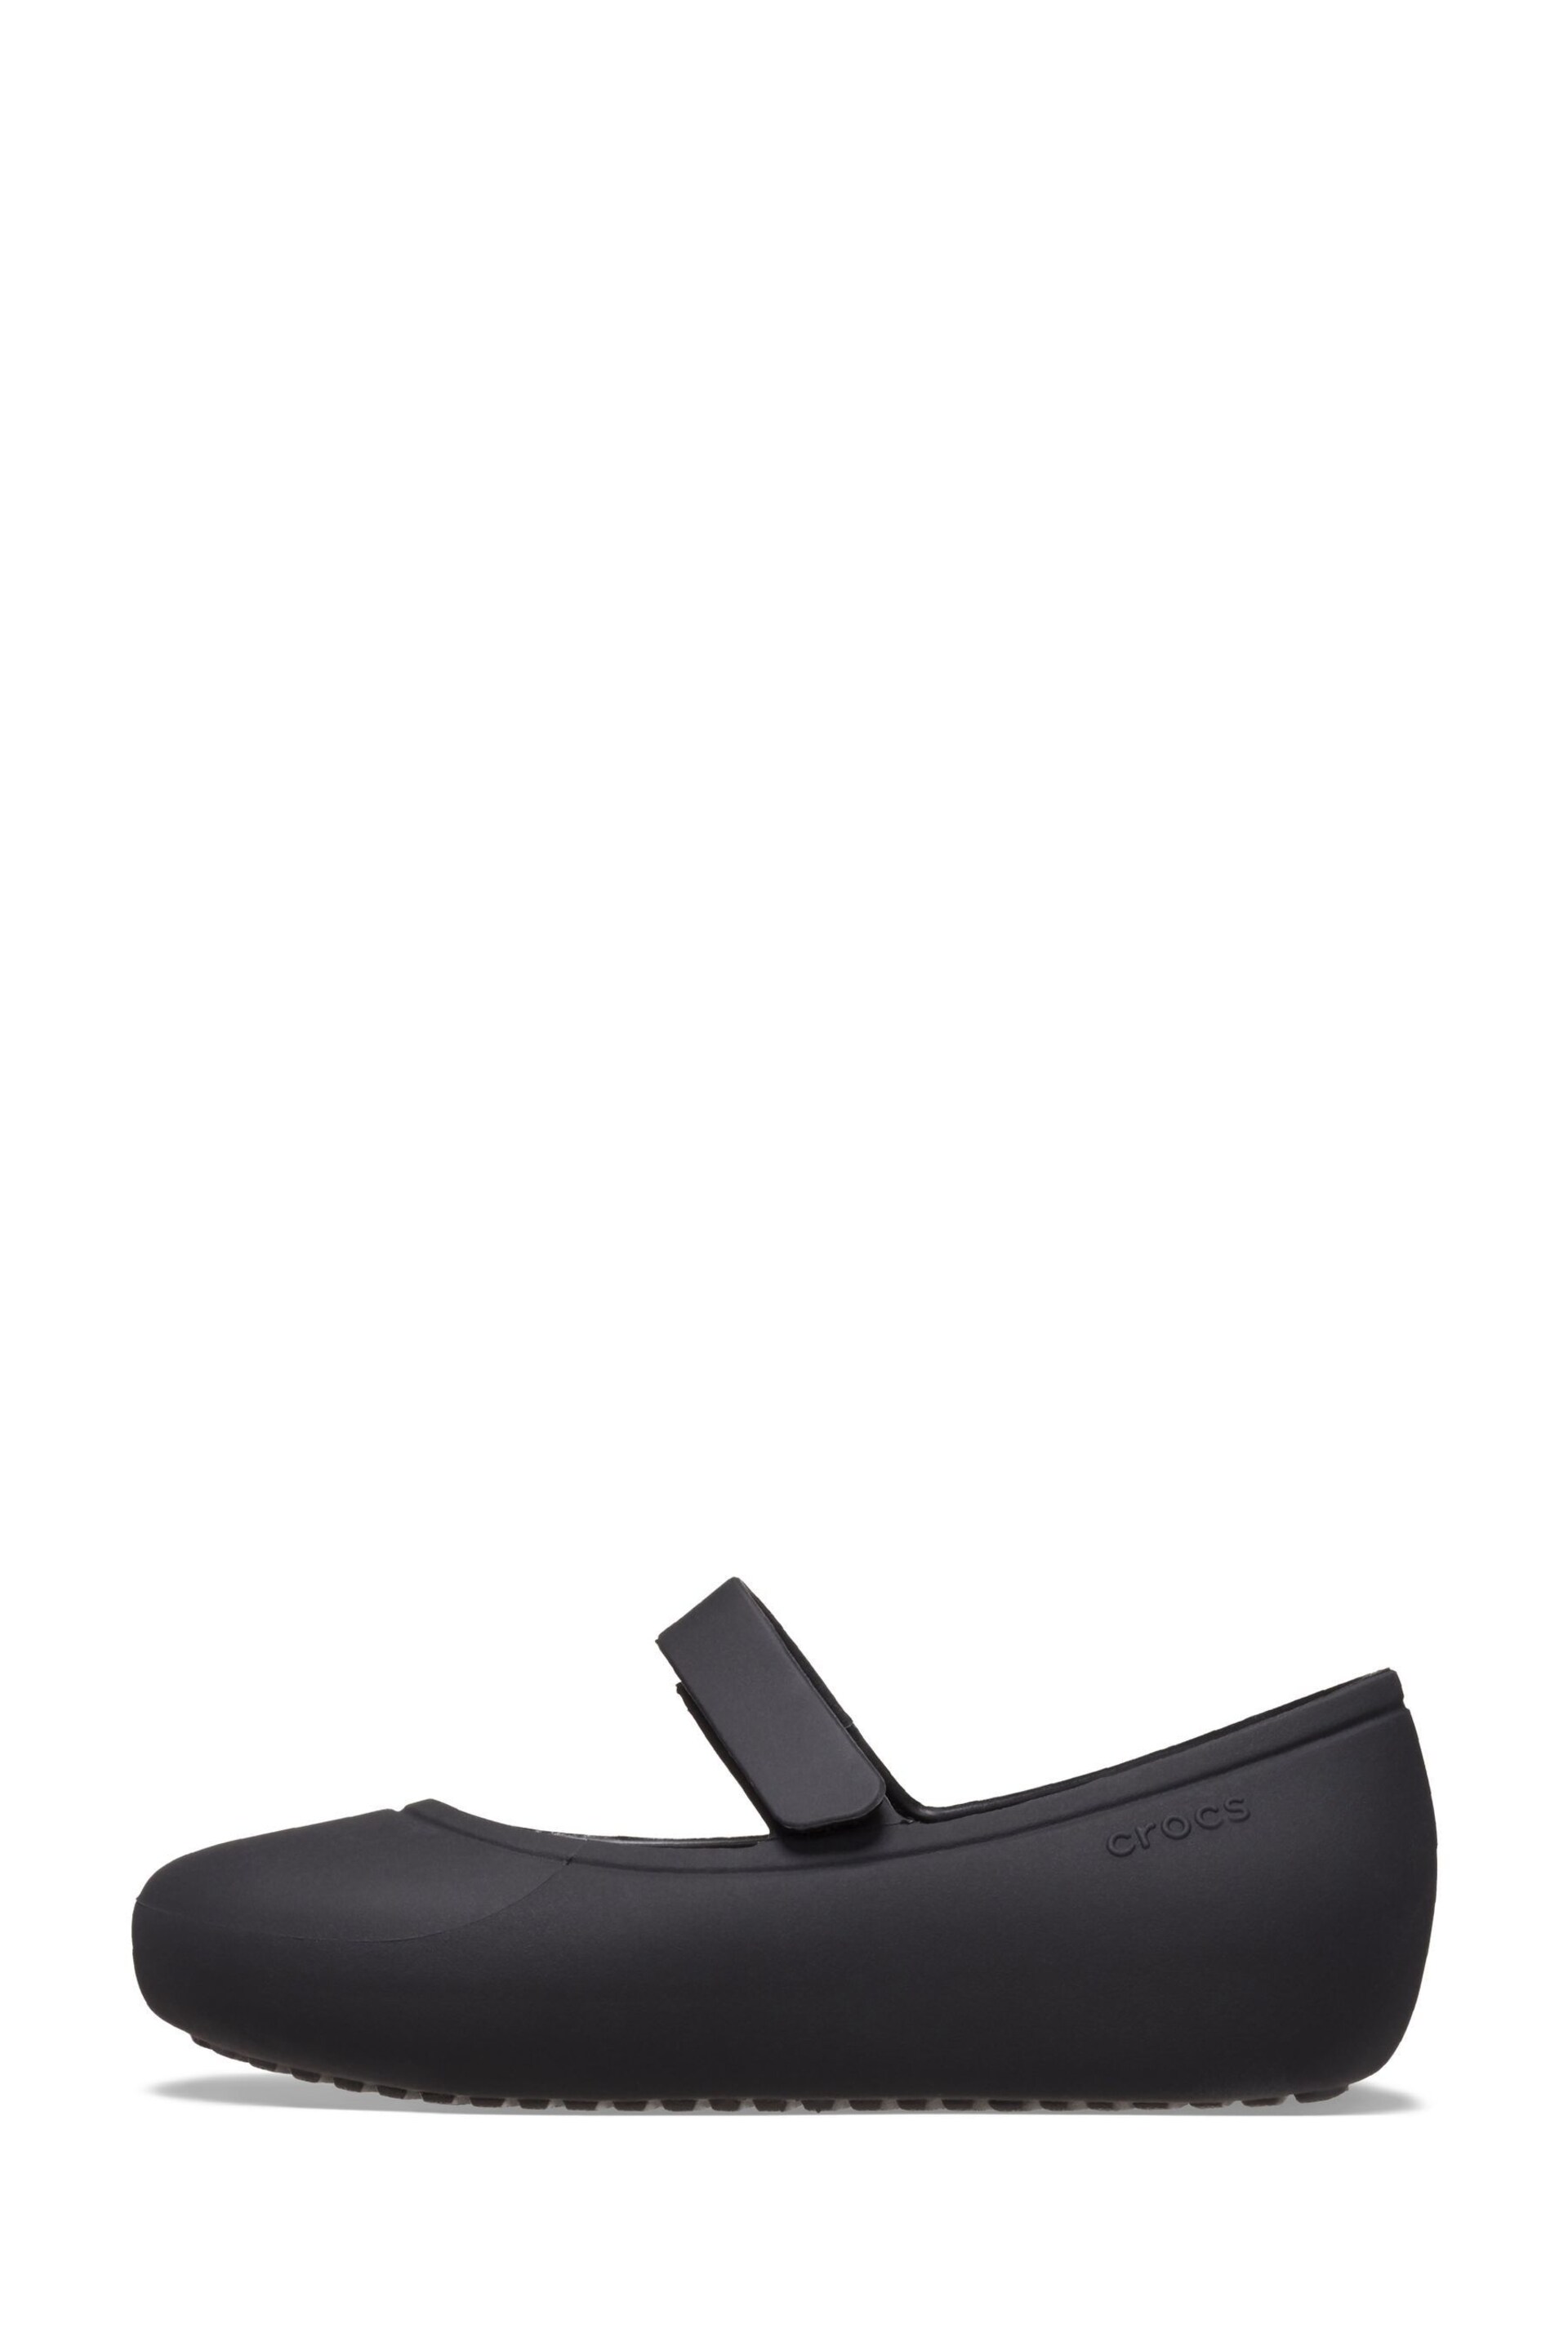 Crocs Brooklyn Mary Jane Toddler Flat Black Shoes - Image 3 of 7